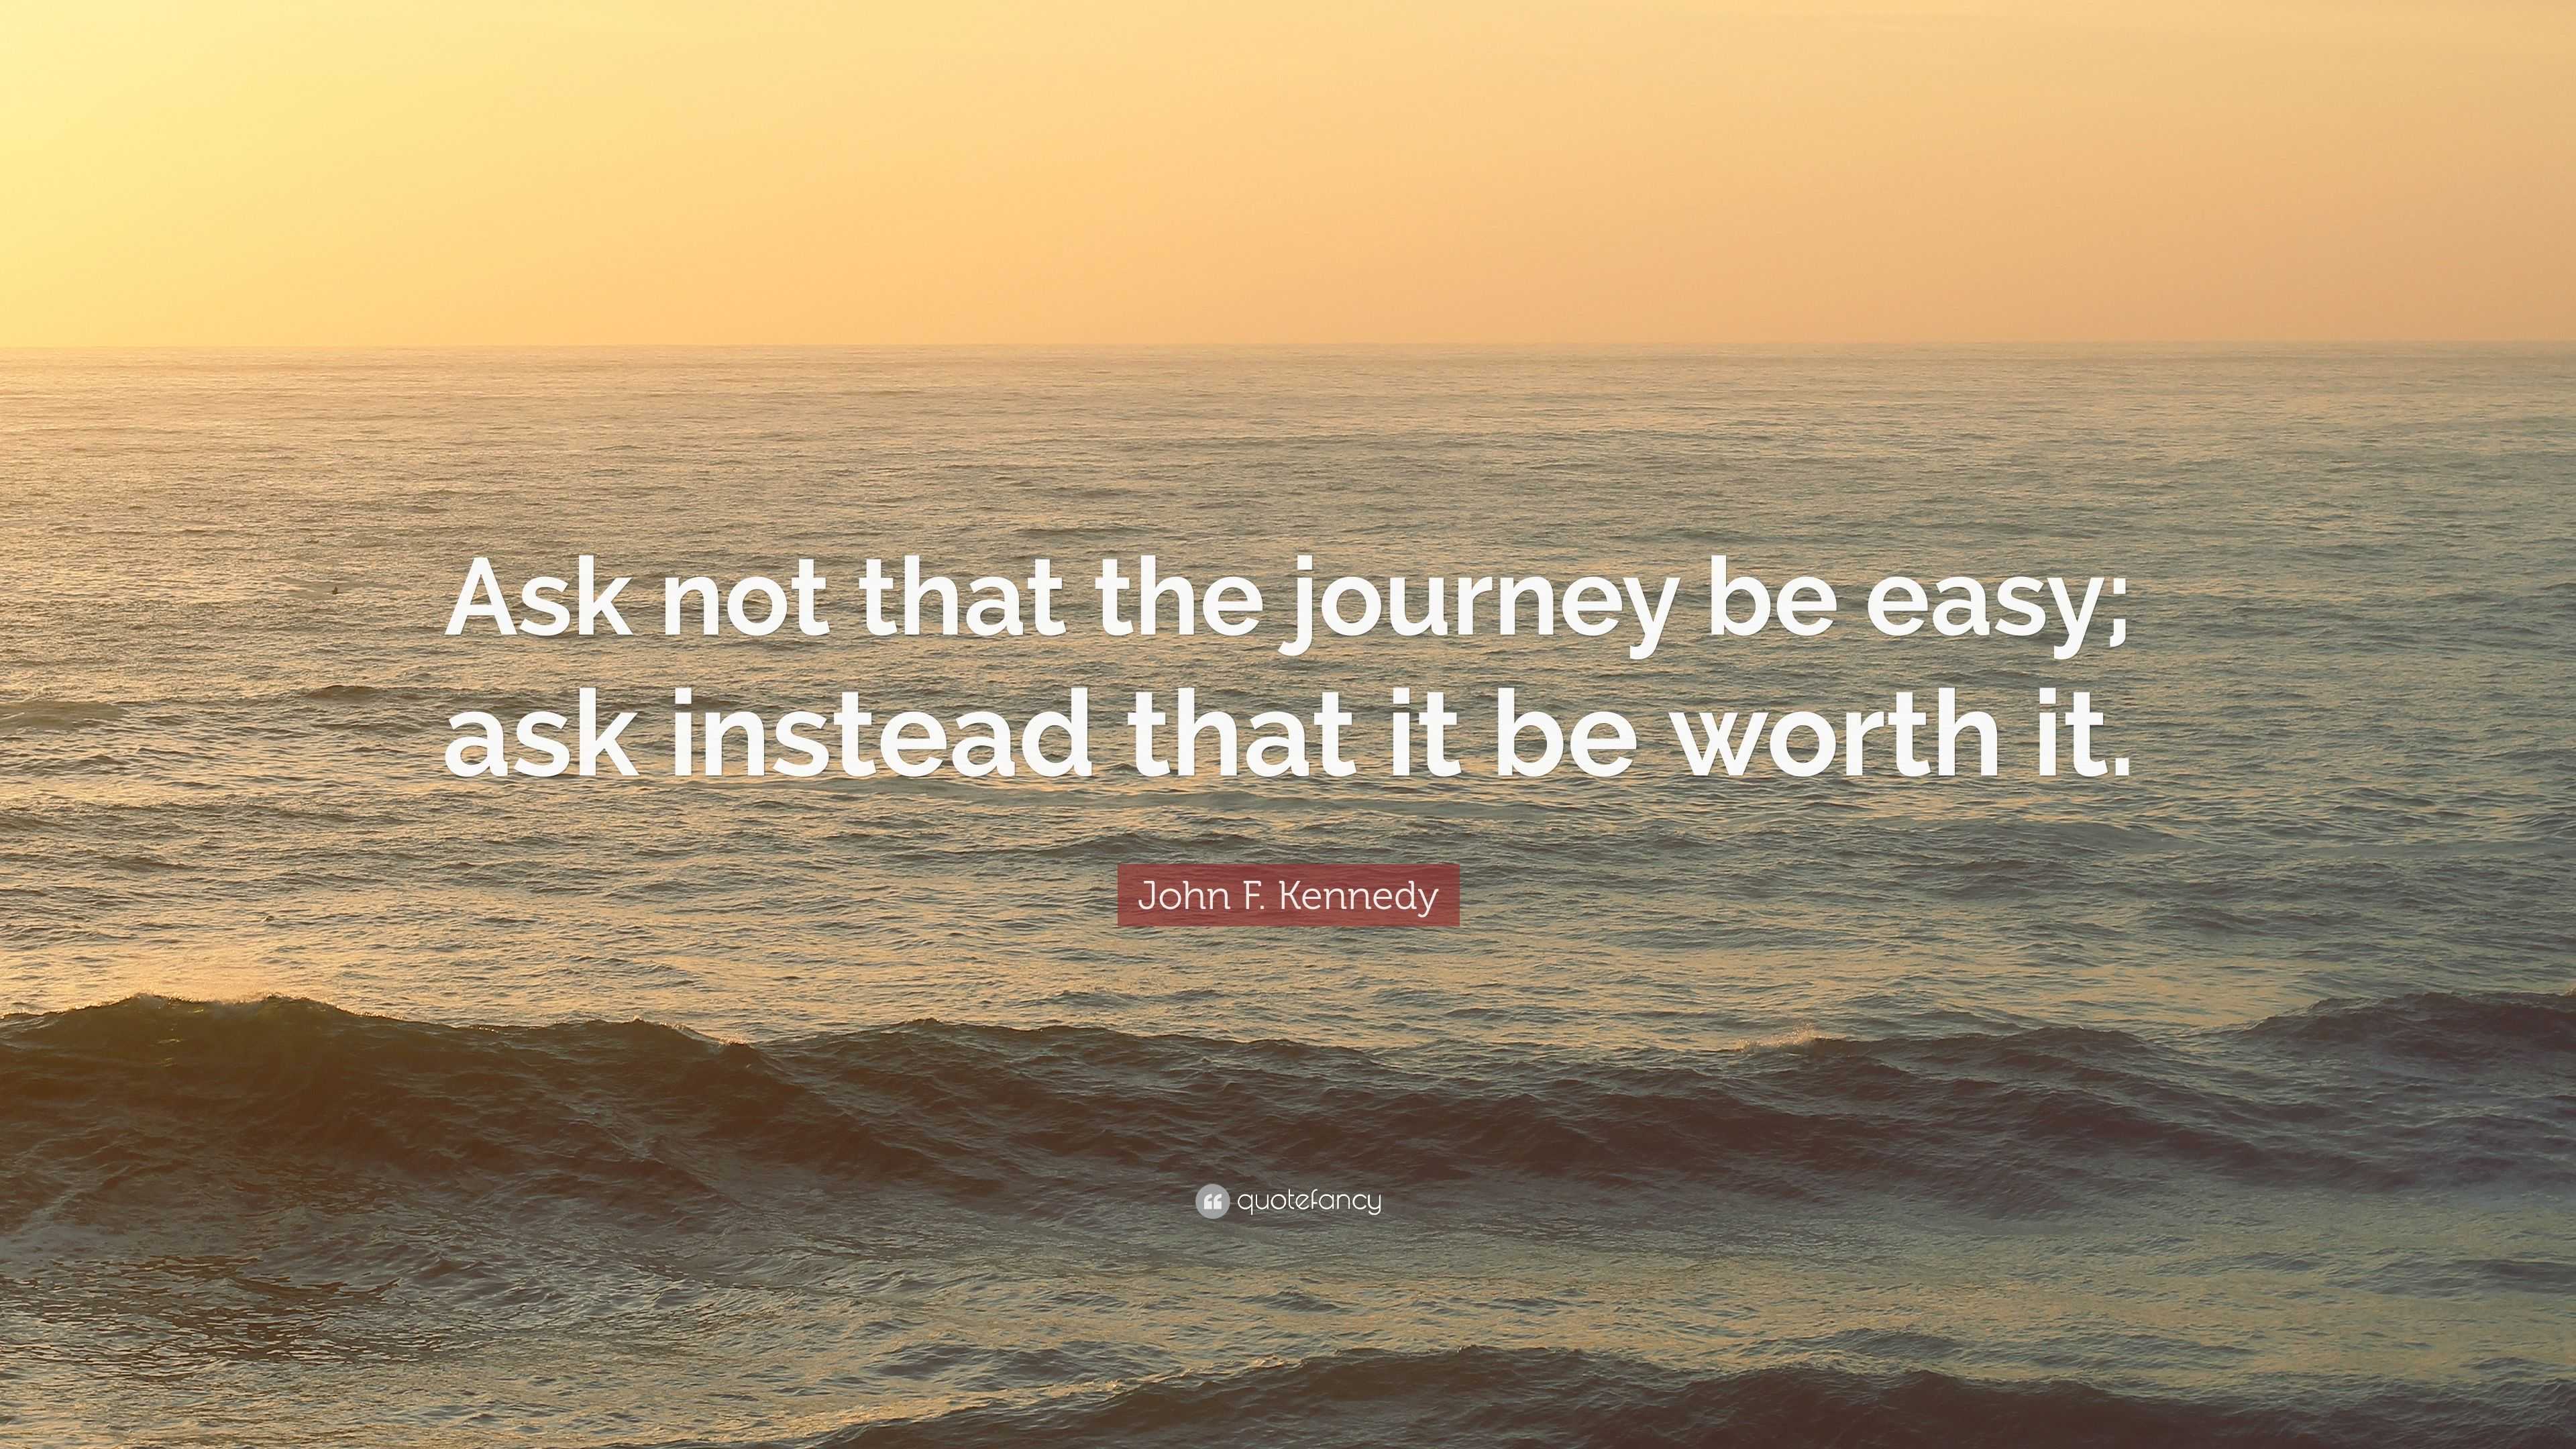 John F. Kennedy Quote: “Ask not that the journey be easy; ask instead ...